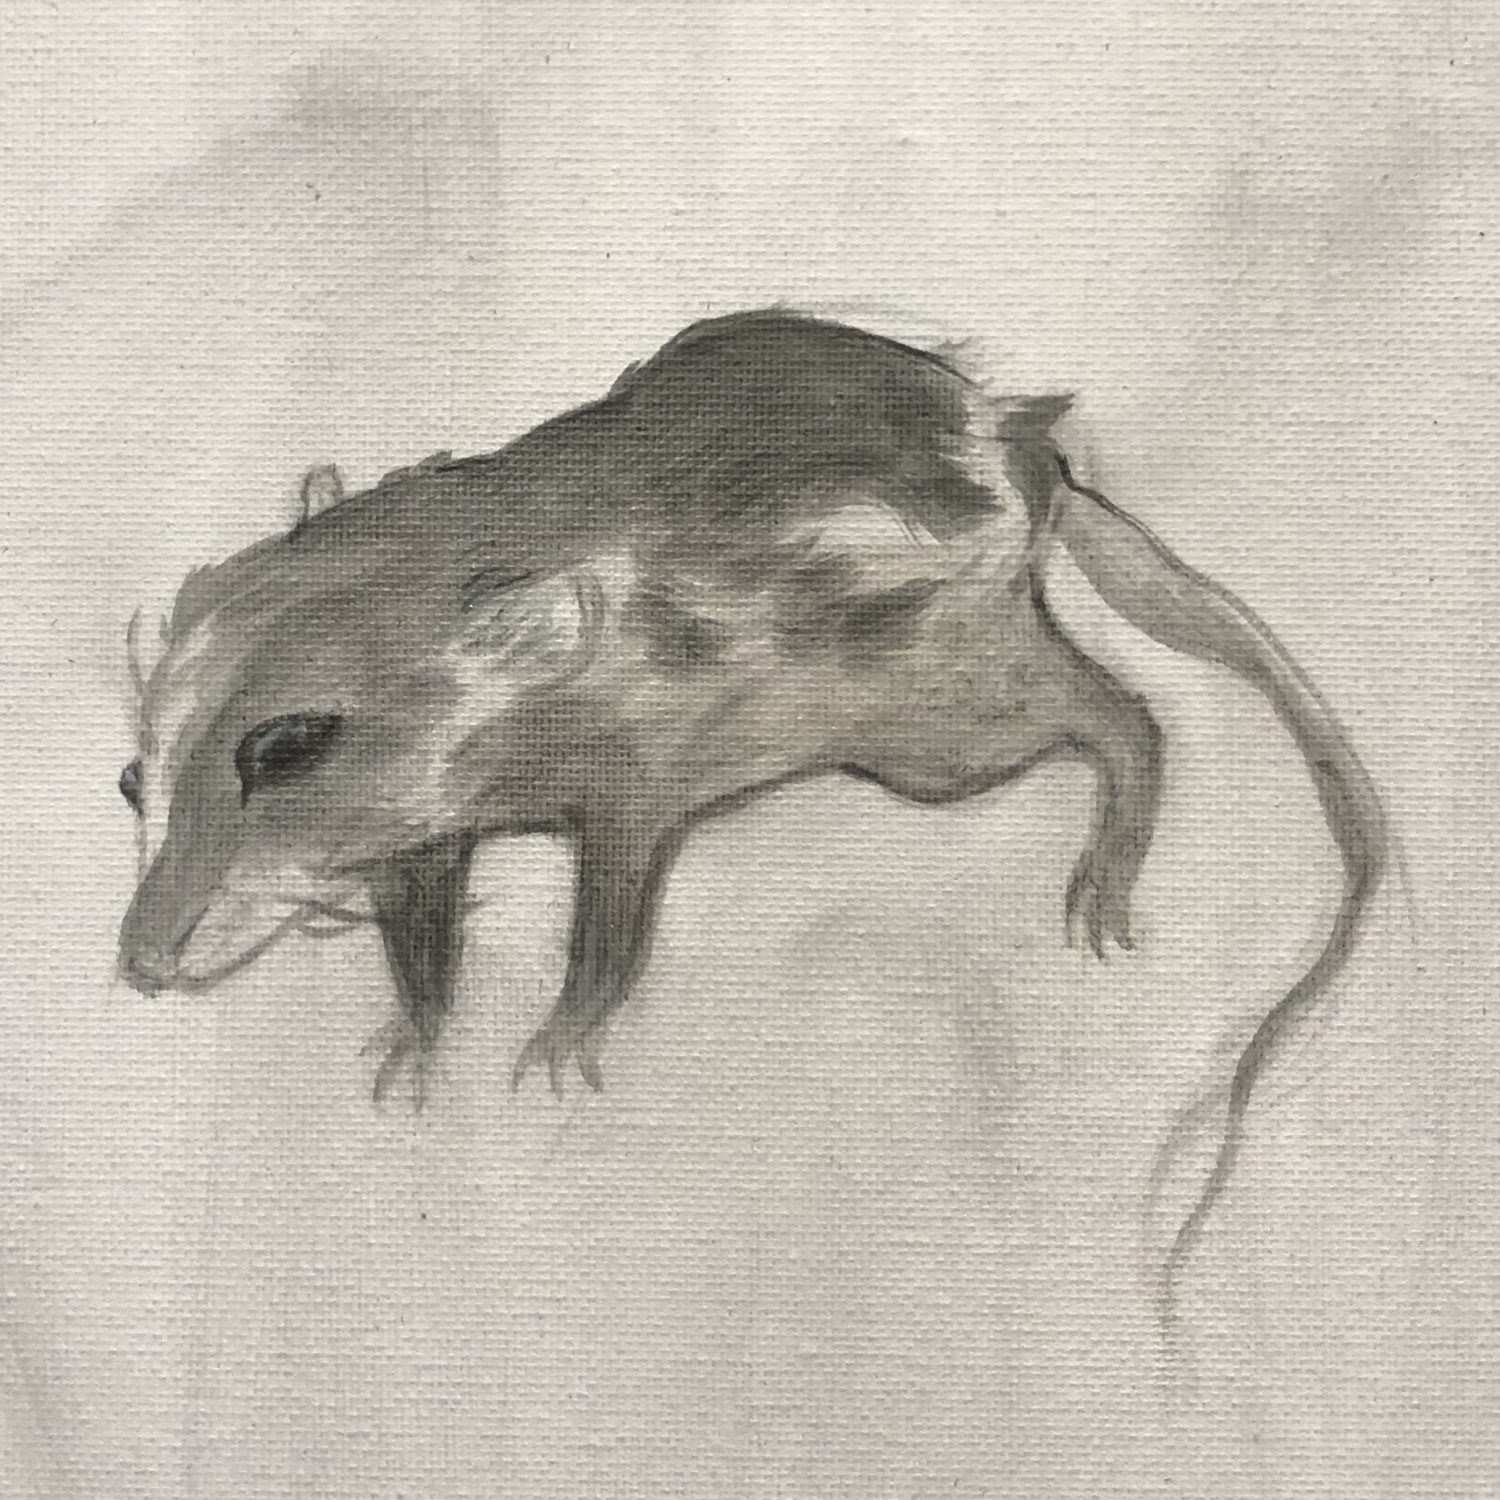 thumbnail of Pet Rat by Megan Nystrom. Medium: Acrylic on canvas. Size 8 x 8 inches Date 2020